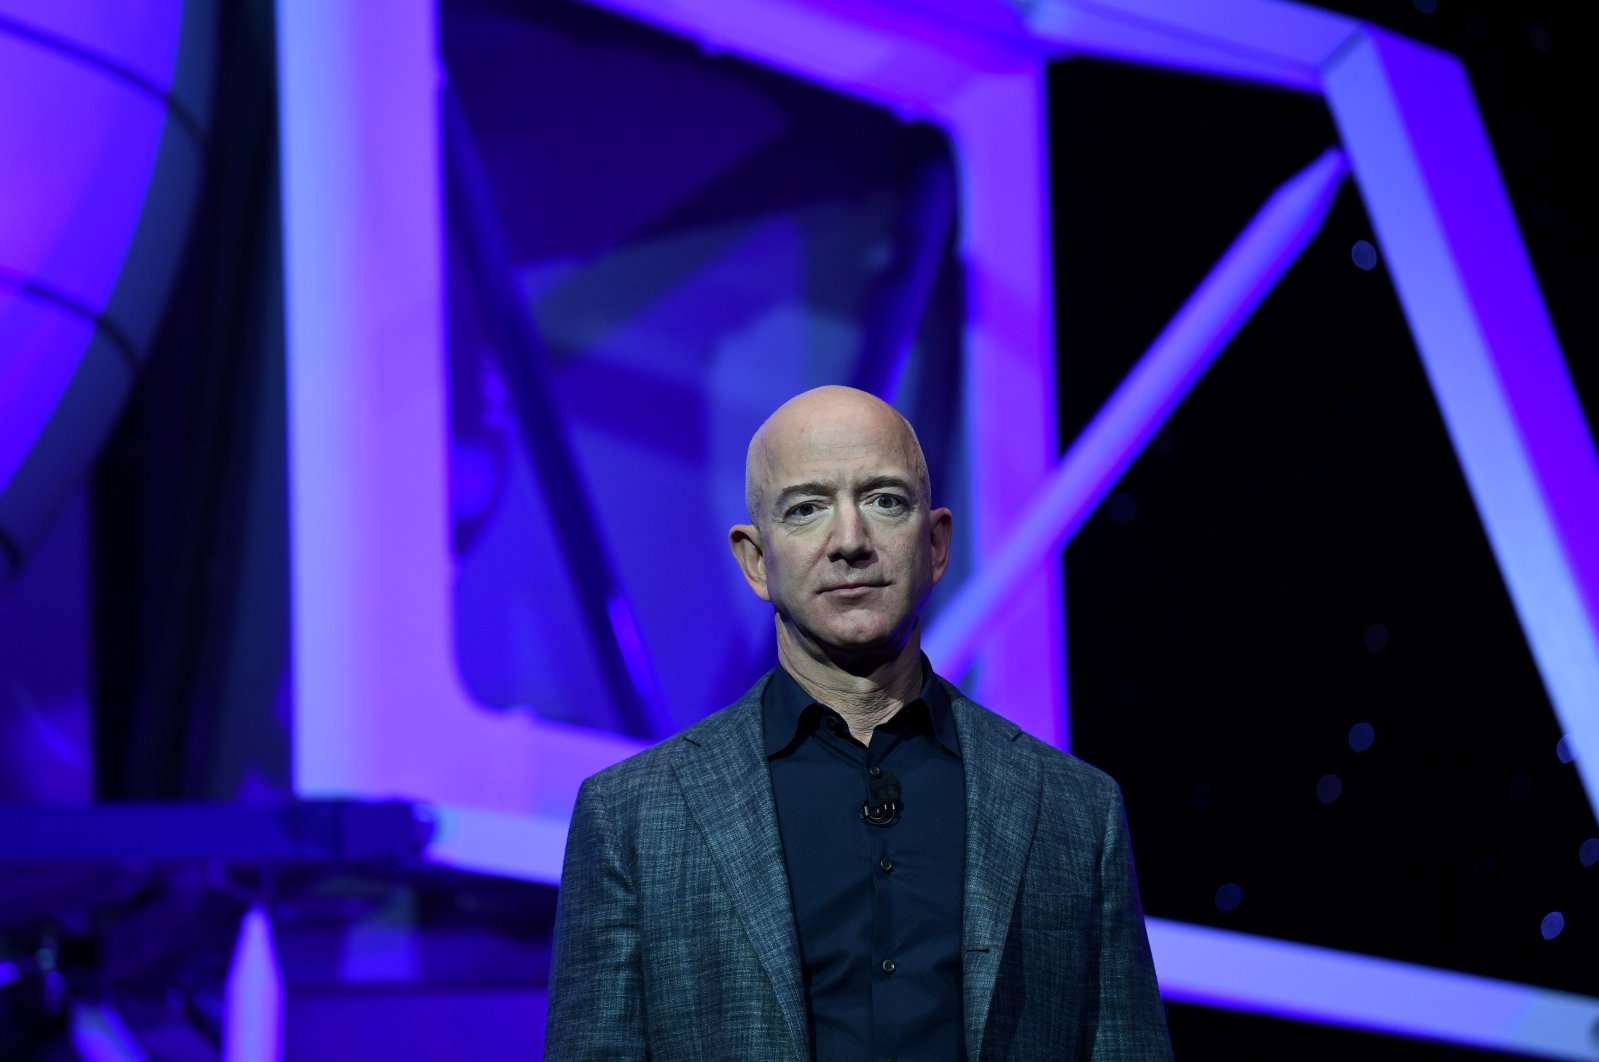 Founder, Chairman, CEO and President of Amazon Jeff Bezos unveils his space company Blue Origin's space exploration lunar lander rocket called Blue Moon during an unveiling event in Washington, U.S., May 9, 2019. (Reuters Photo)